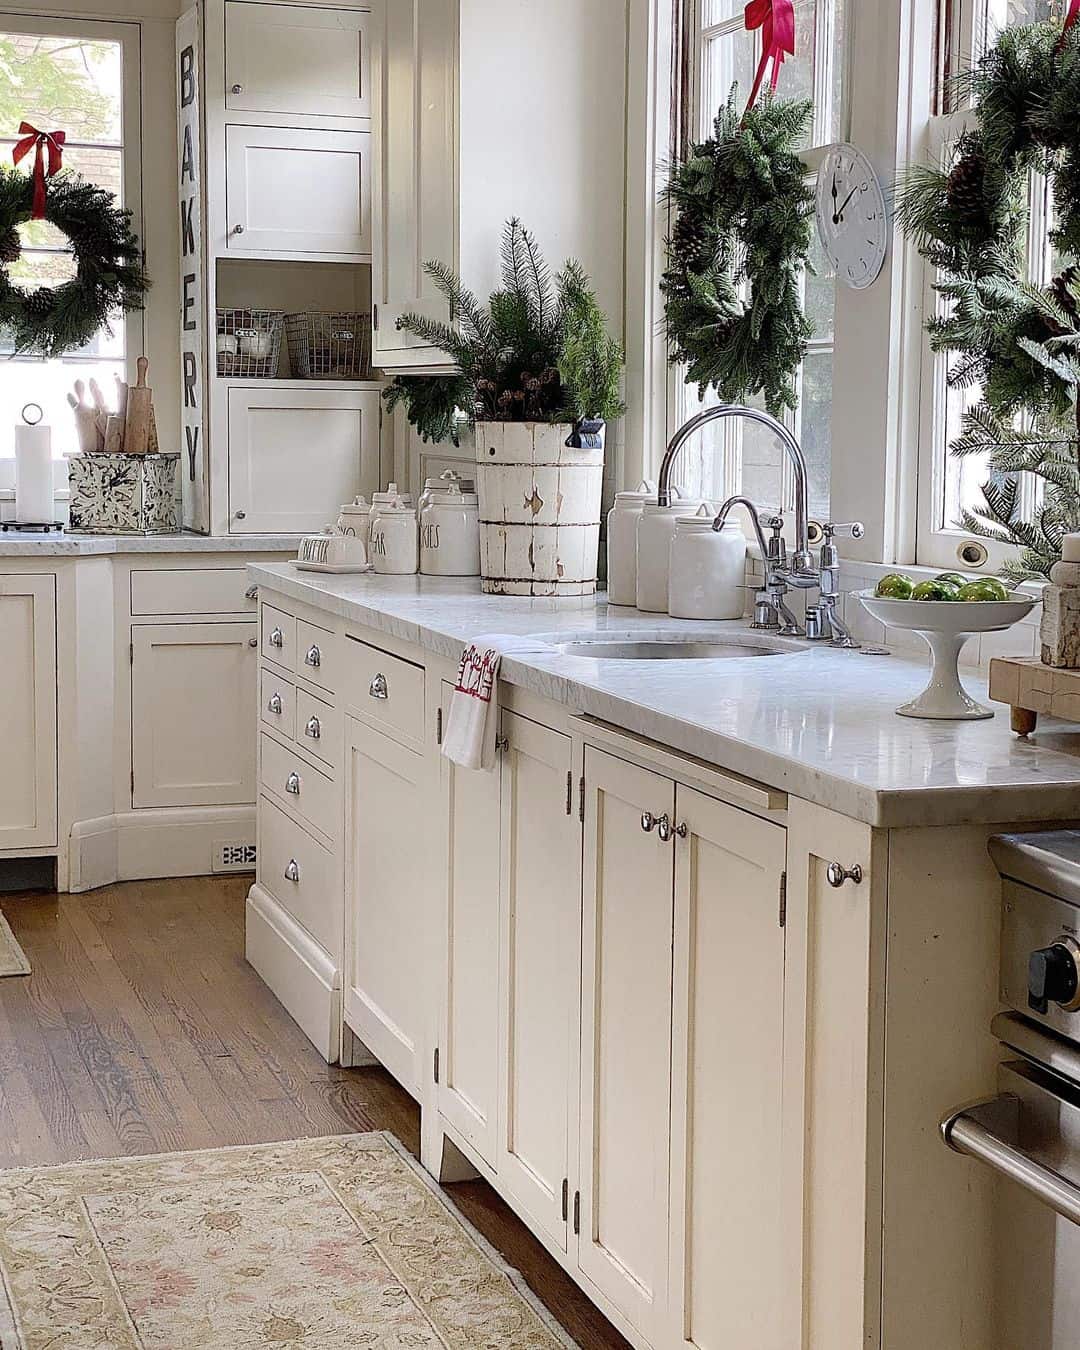 Festive Farmhouse Charm with Christmas Cream Kitchen Cabinets